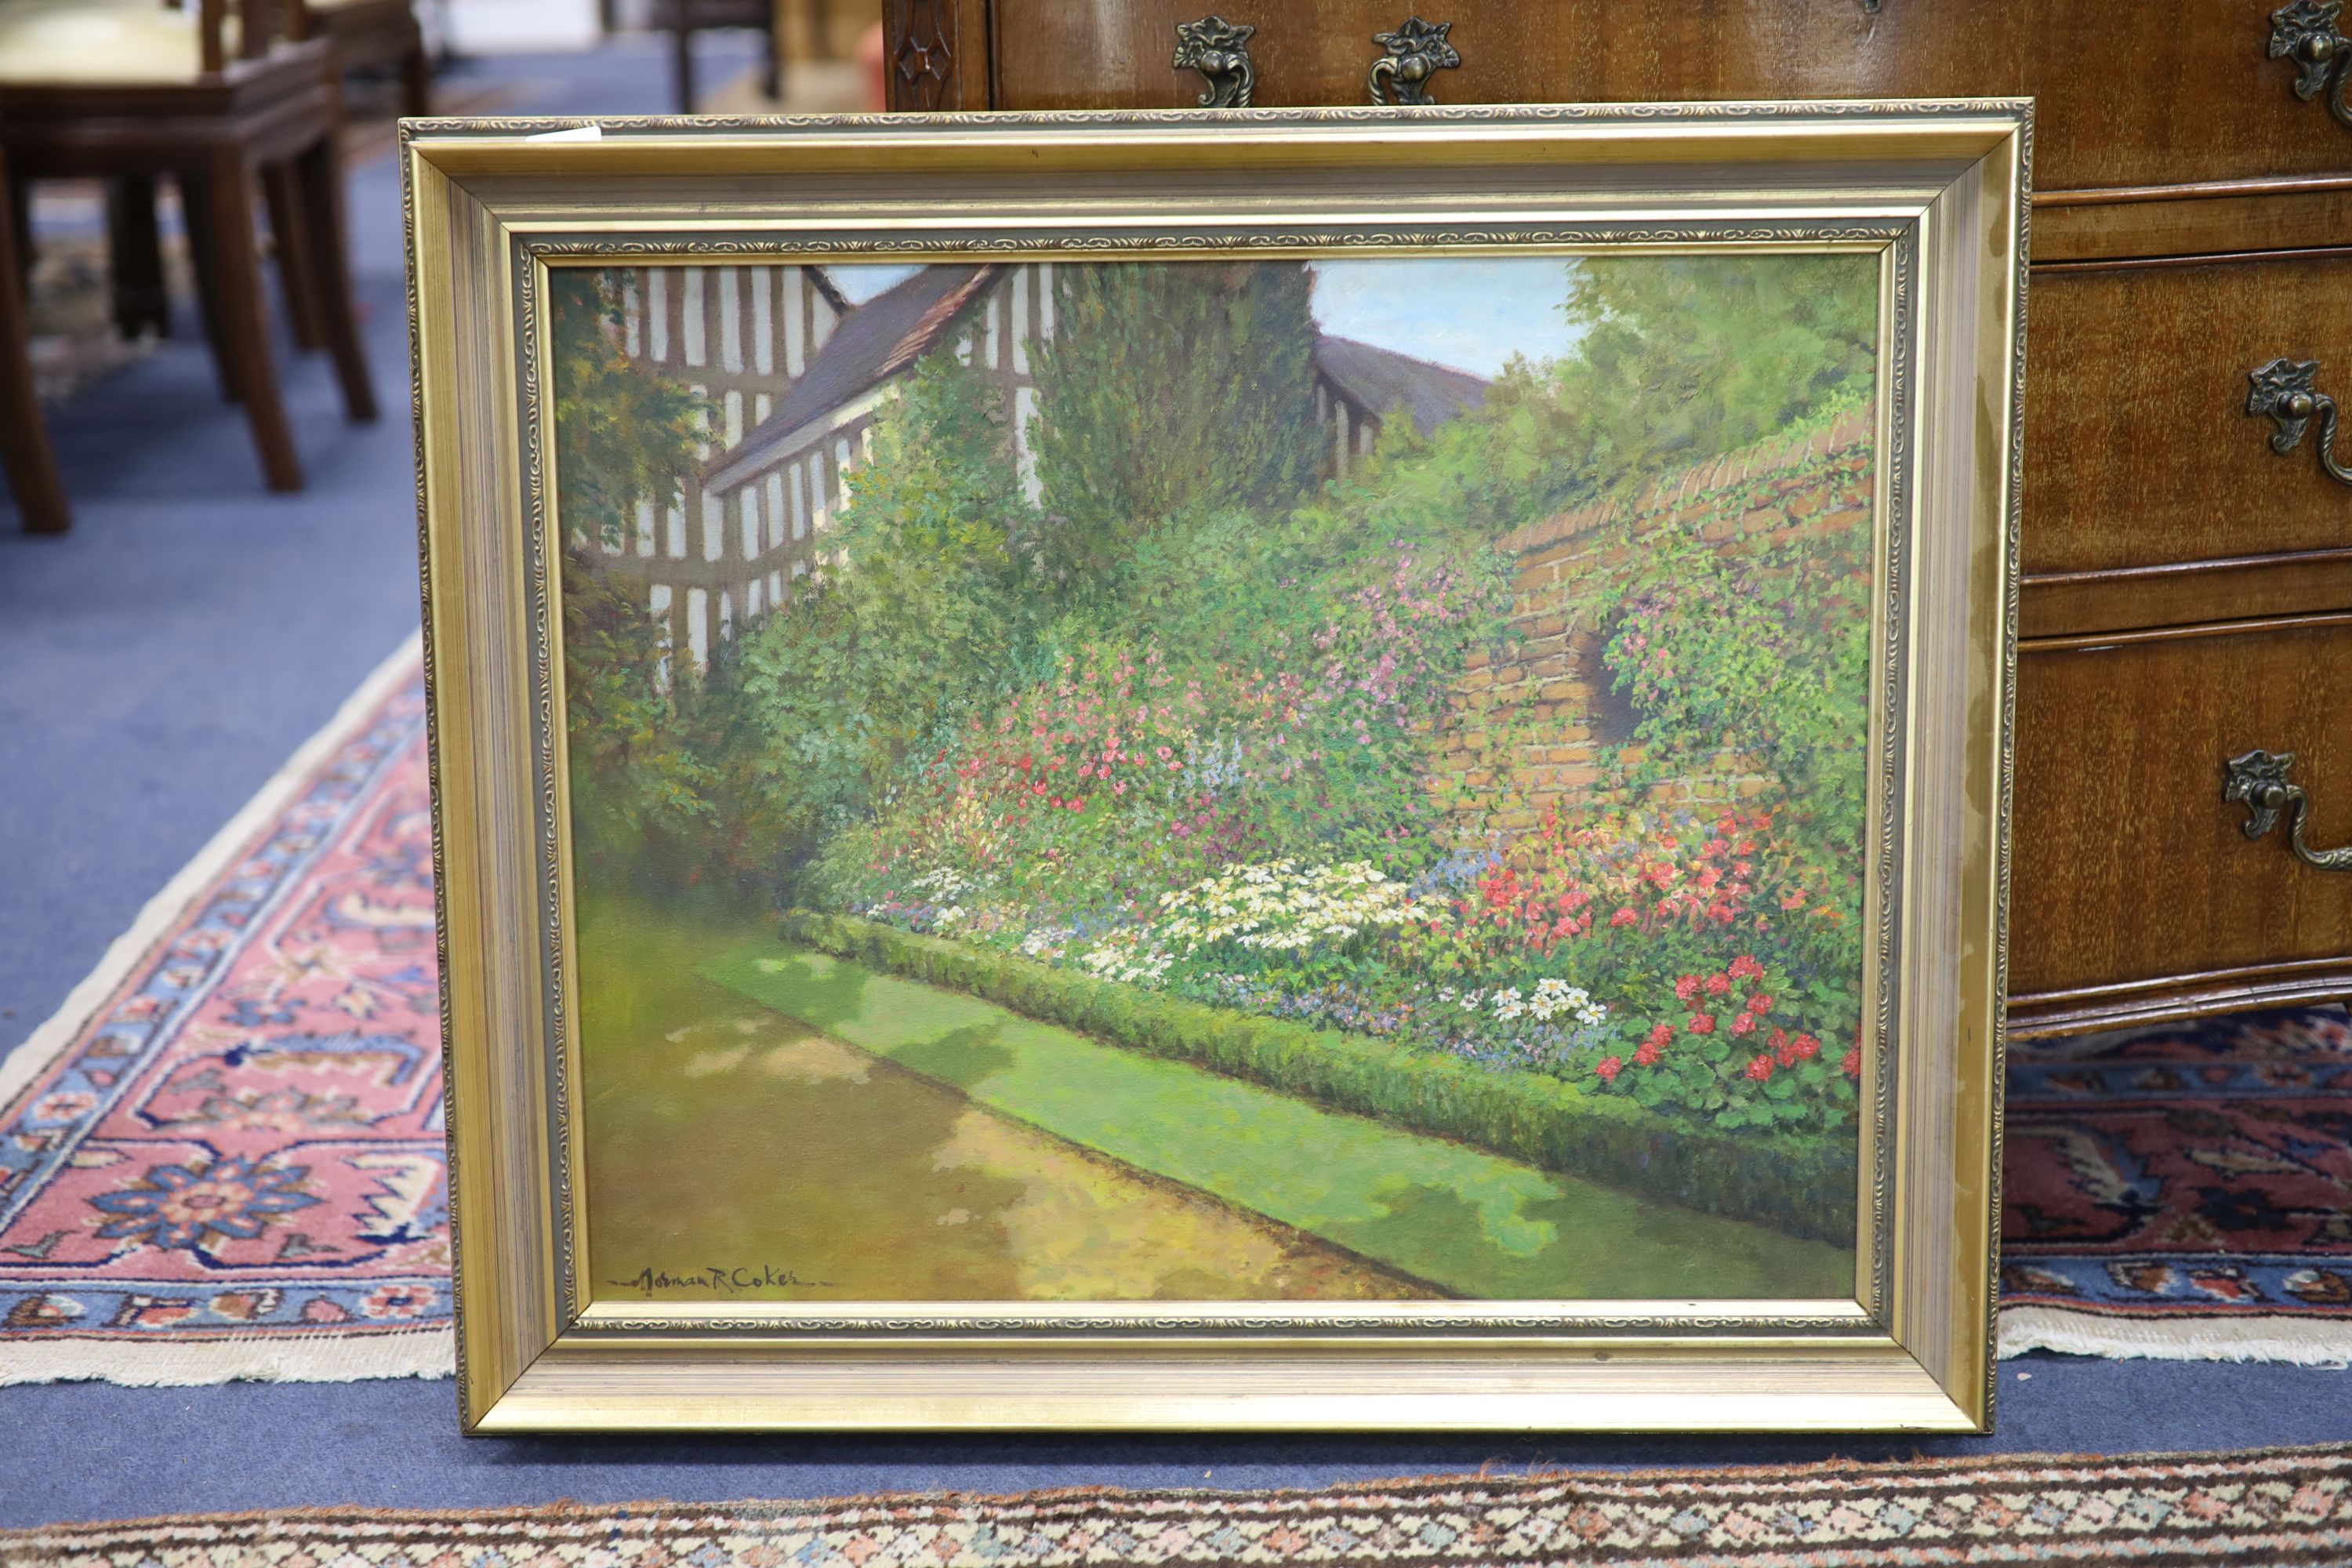 Norman R.Coker, oil on canvas, Herbaceous Border, signed, 44 x 54.5cm